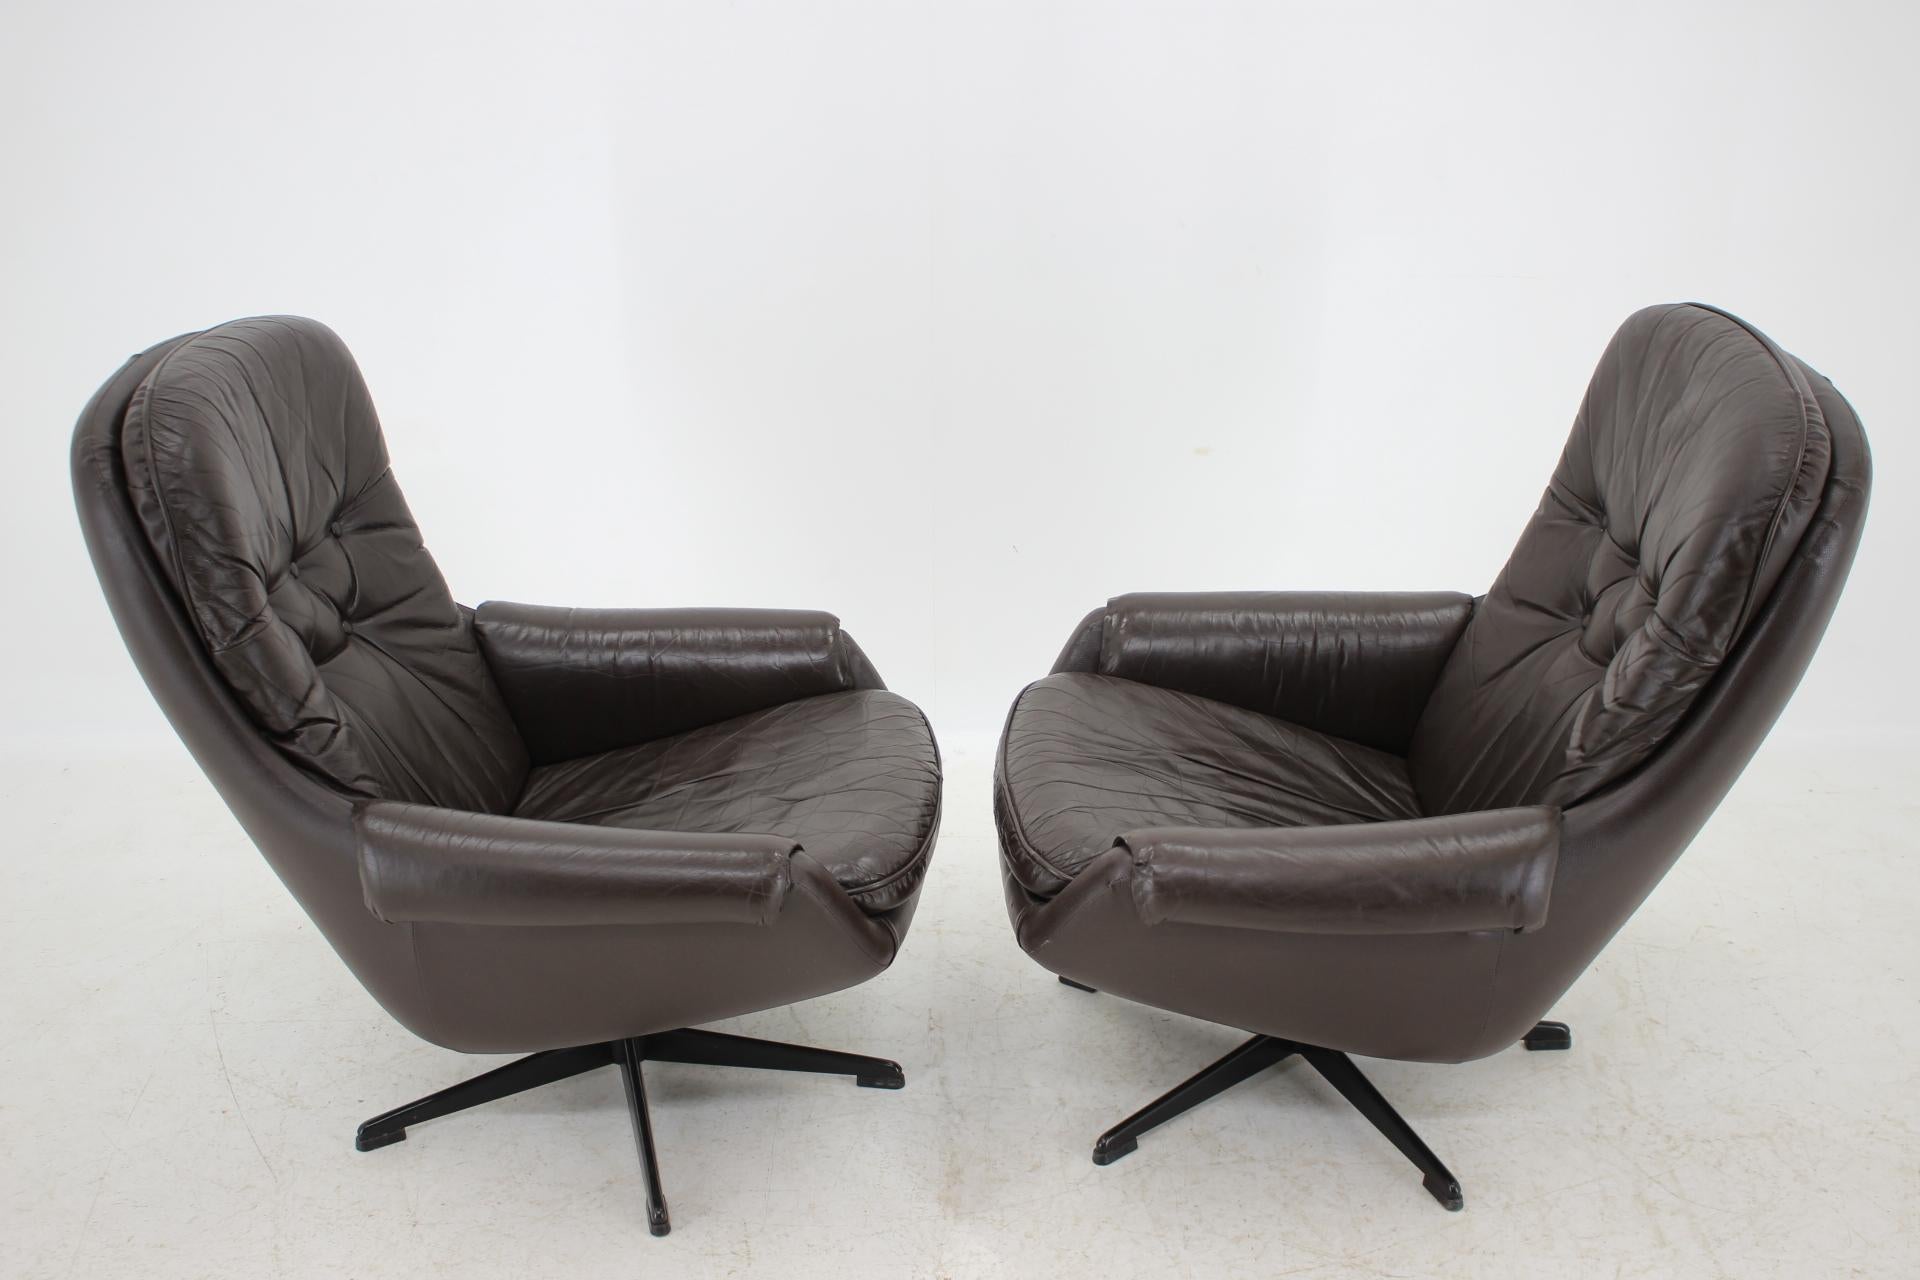 Finnish Design Scandinavian Leather Armchairs or Lounge Chairs by PEEM, 1970s